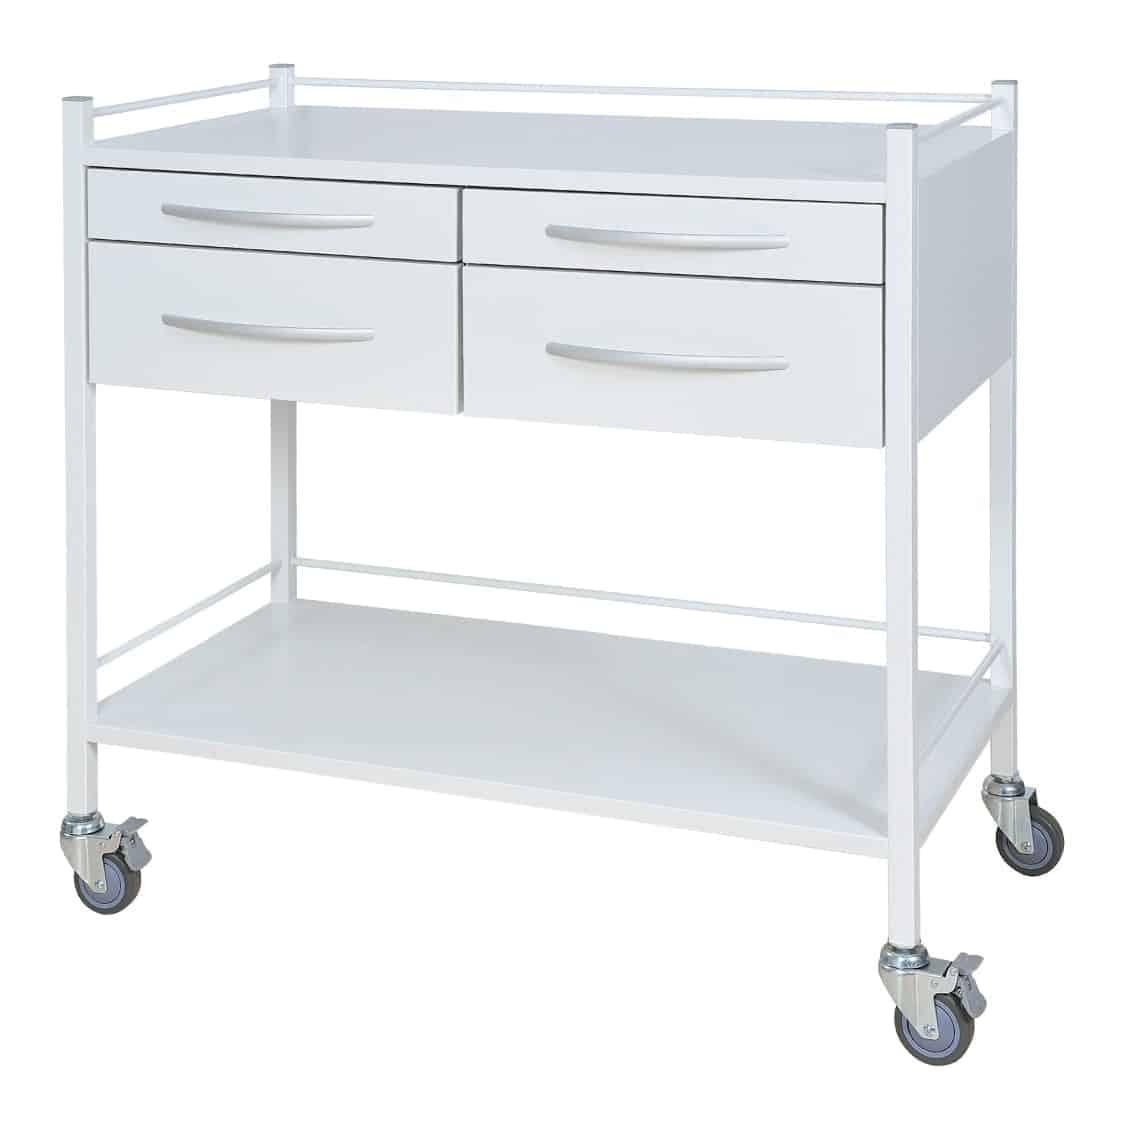 Double White Instrument Trolley